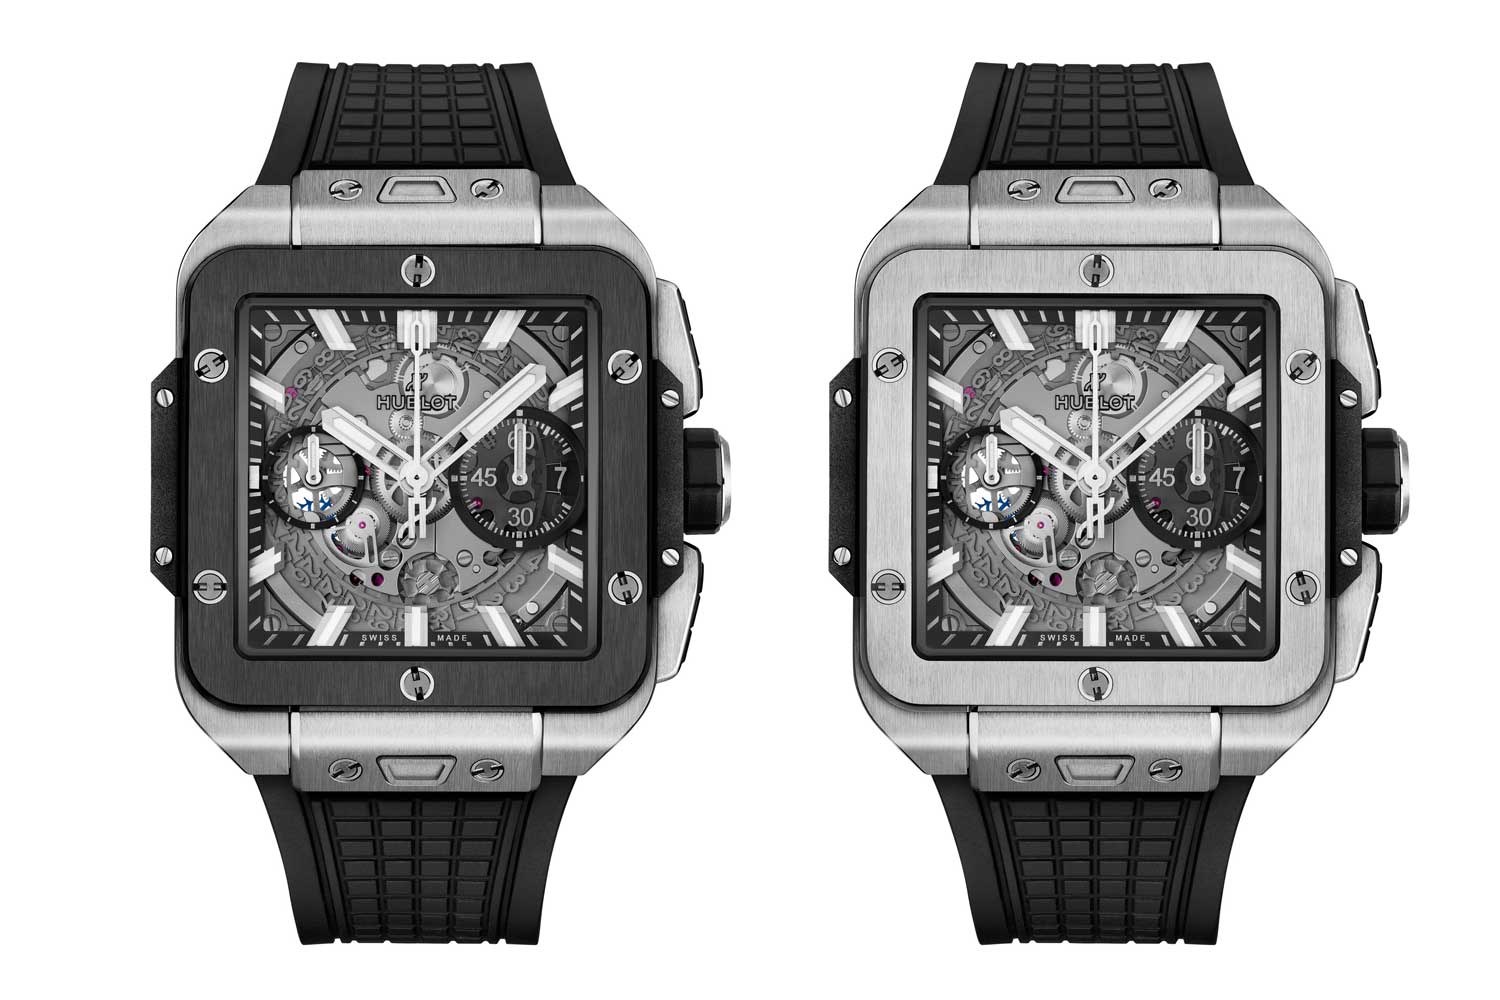 Aside from the All Black the Square Bang is offered in titanium models